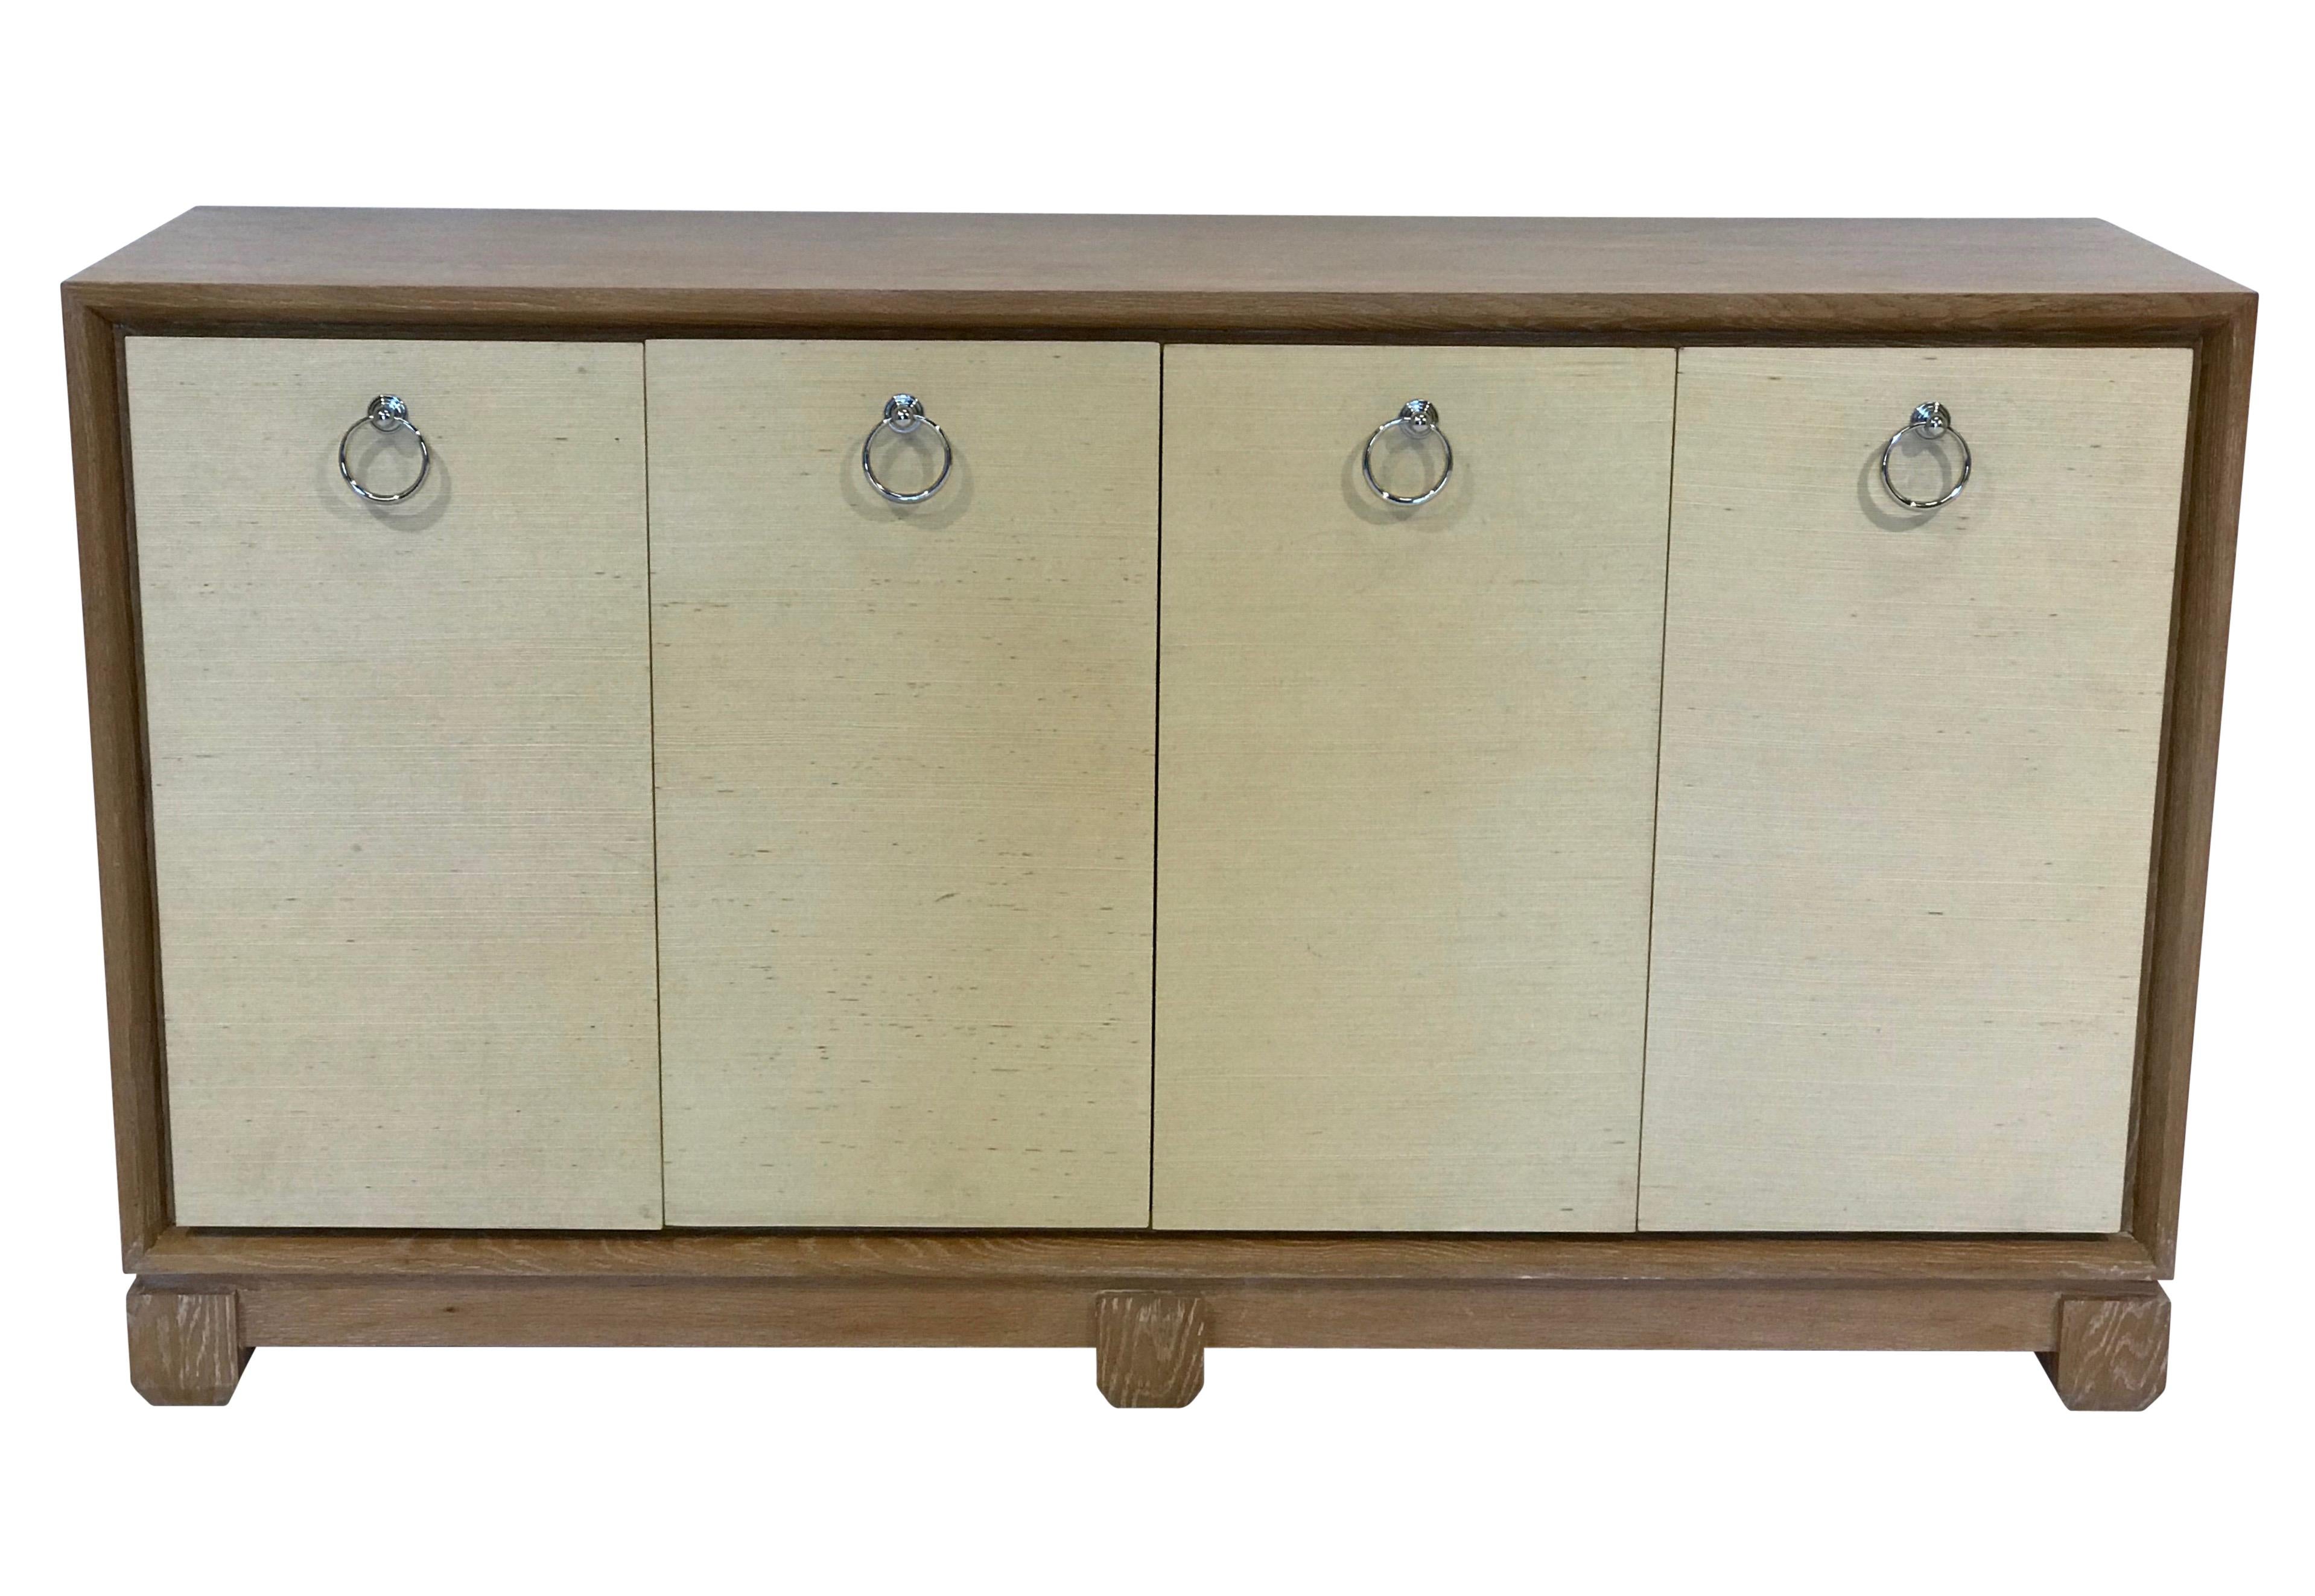 Beautifully constructed American contemporary solid pickled oak credenza having a natural woven fabric covering the front doors and on the interior.  Fitted interior shelves and chrome ring handles on the door fronts. 

